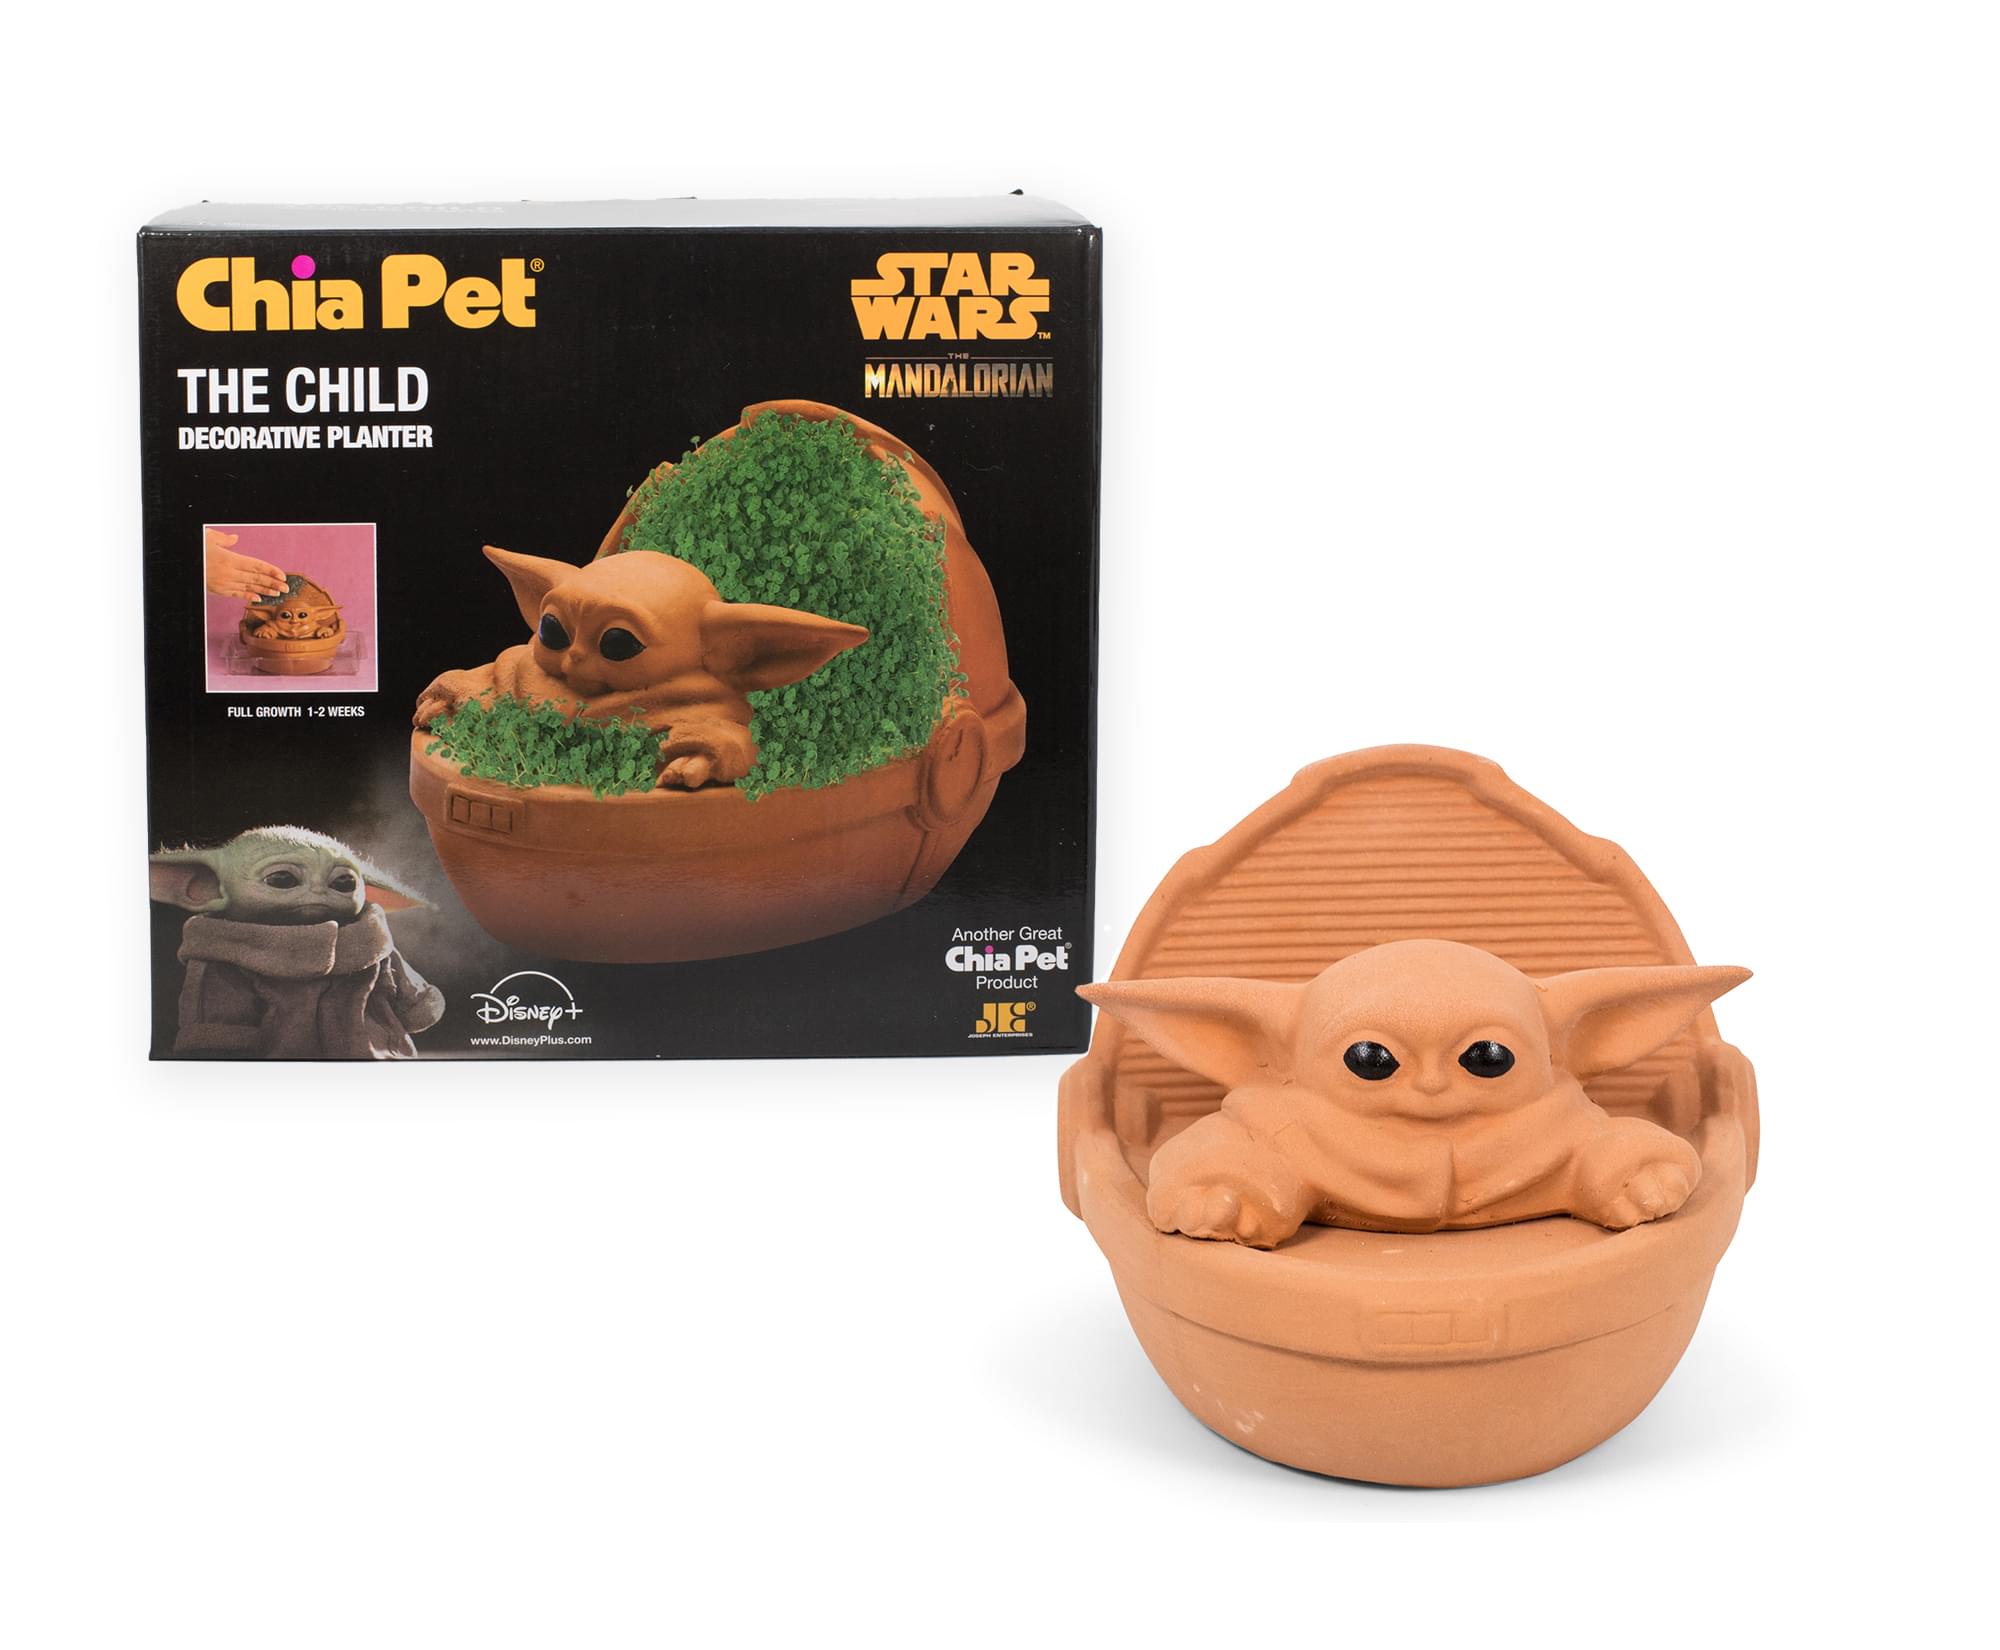 Chia -Pet Planter Decorat Pottery Sunlight Fast-Growing Seed Pack- Star Wars Yoda the Child- Orange - image 1 of 7